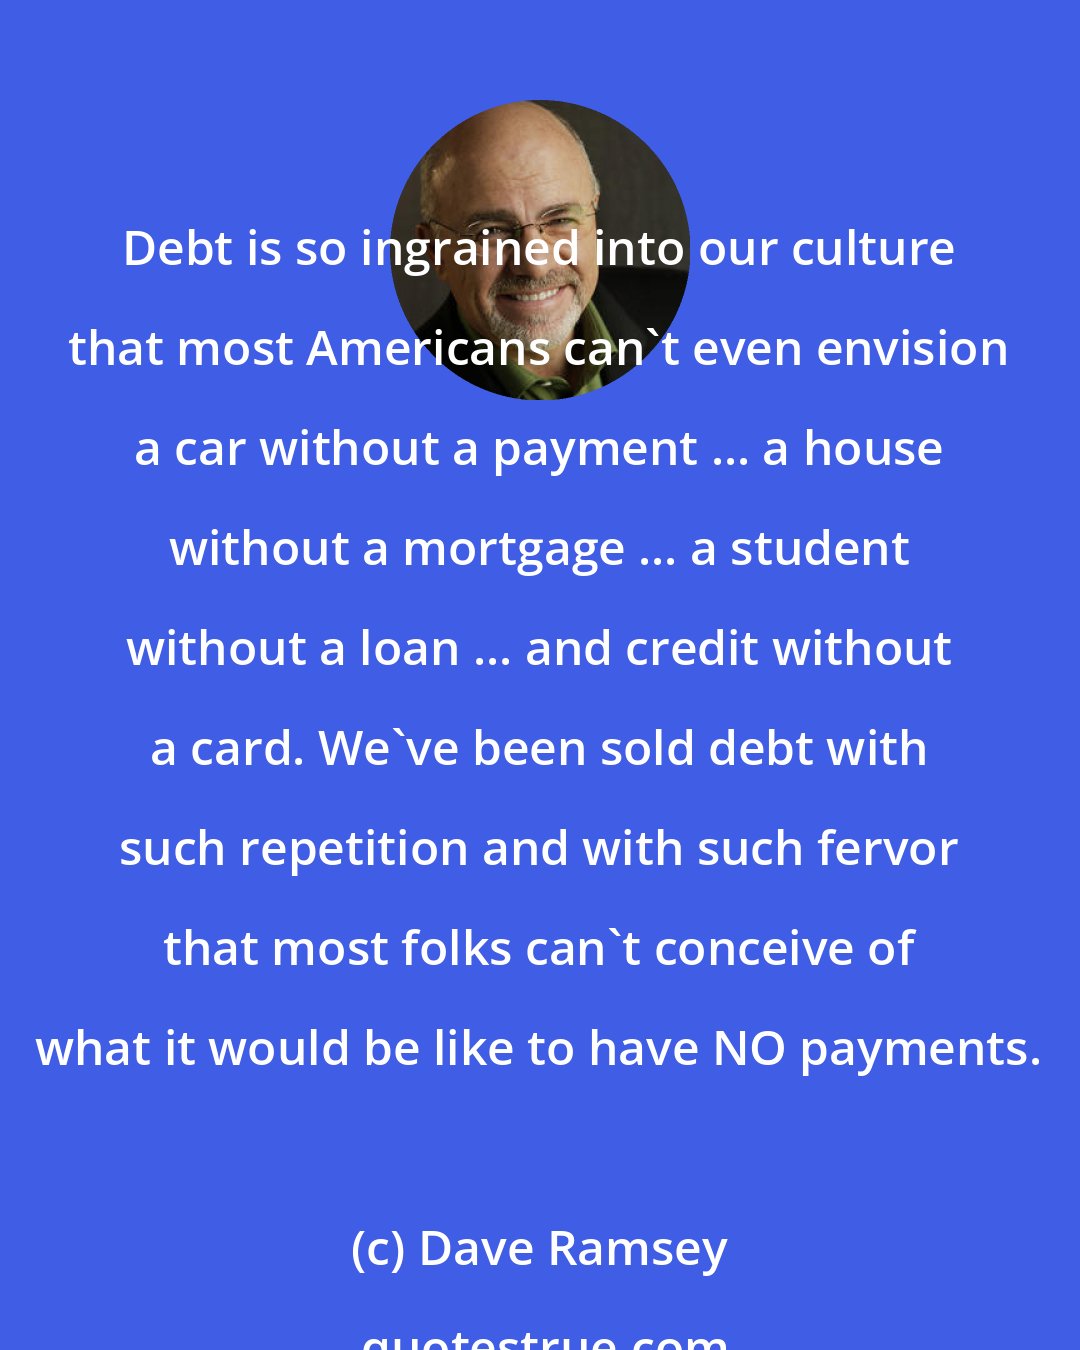 Dave Ramsey: Debt is so ingrained into our culture that most Americans can't even envision a car without a payment ... a house without a mortgage ... a student without a loan ... and credit without a card. We've been sold debt with such repetition and with such fervor that most folks can't conceive of what it would be like to have NO payments.